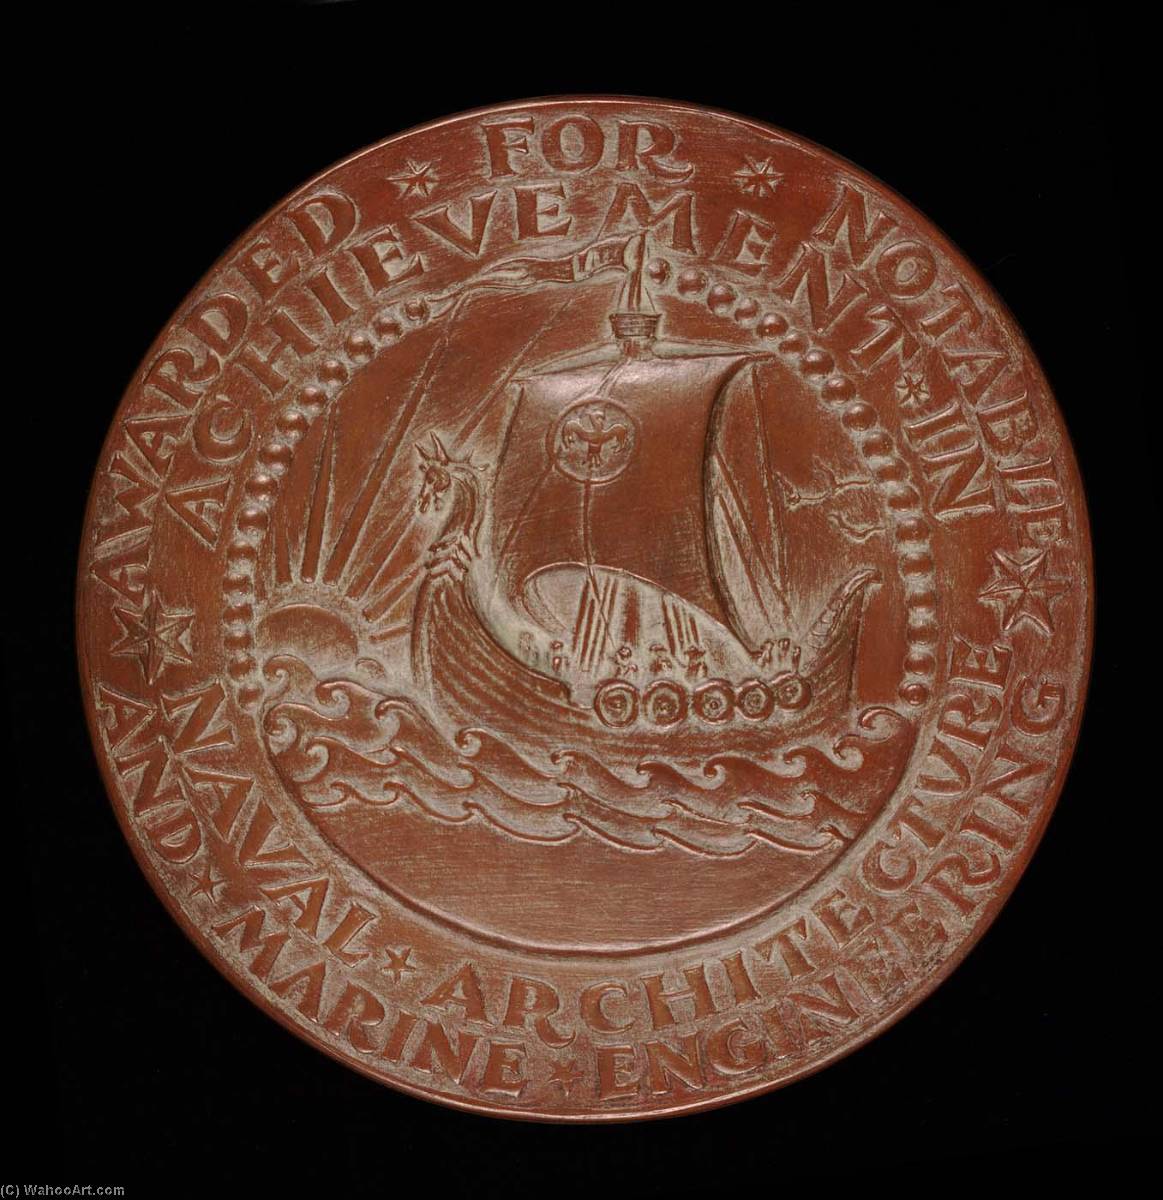 WikiOO.org - 백과 사전 - 회화, 삽화 Anthony De Francisci - David W. Taylor Medal Awarded for Notable Achievement in Navy Architecture and Marine Engineering (reverse)